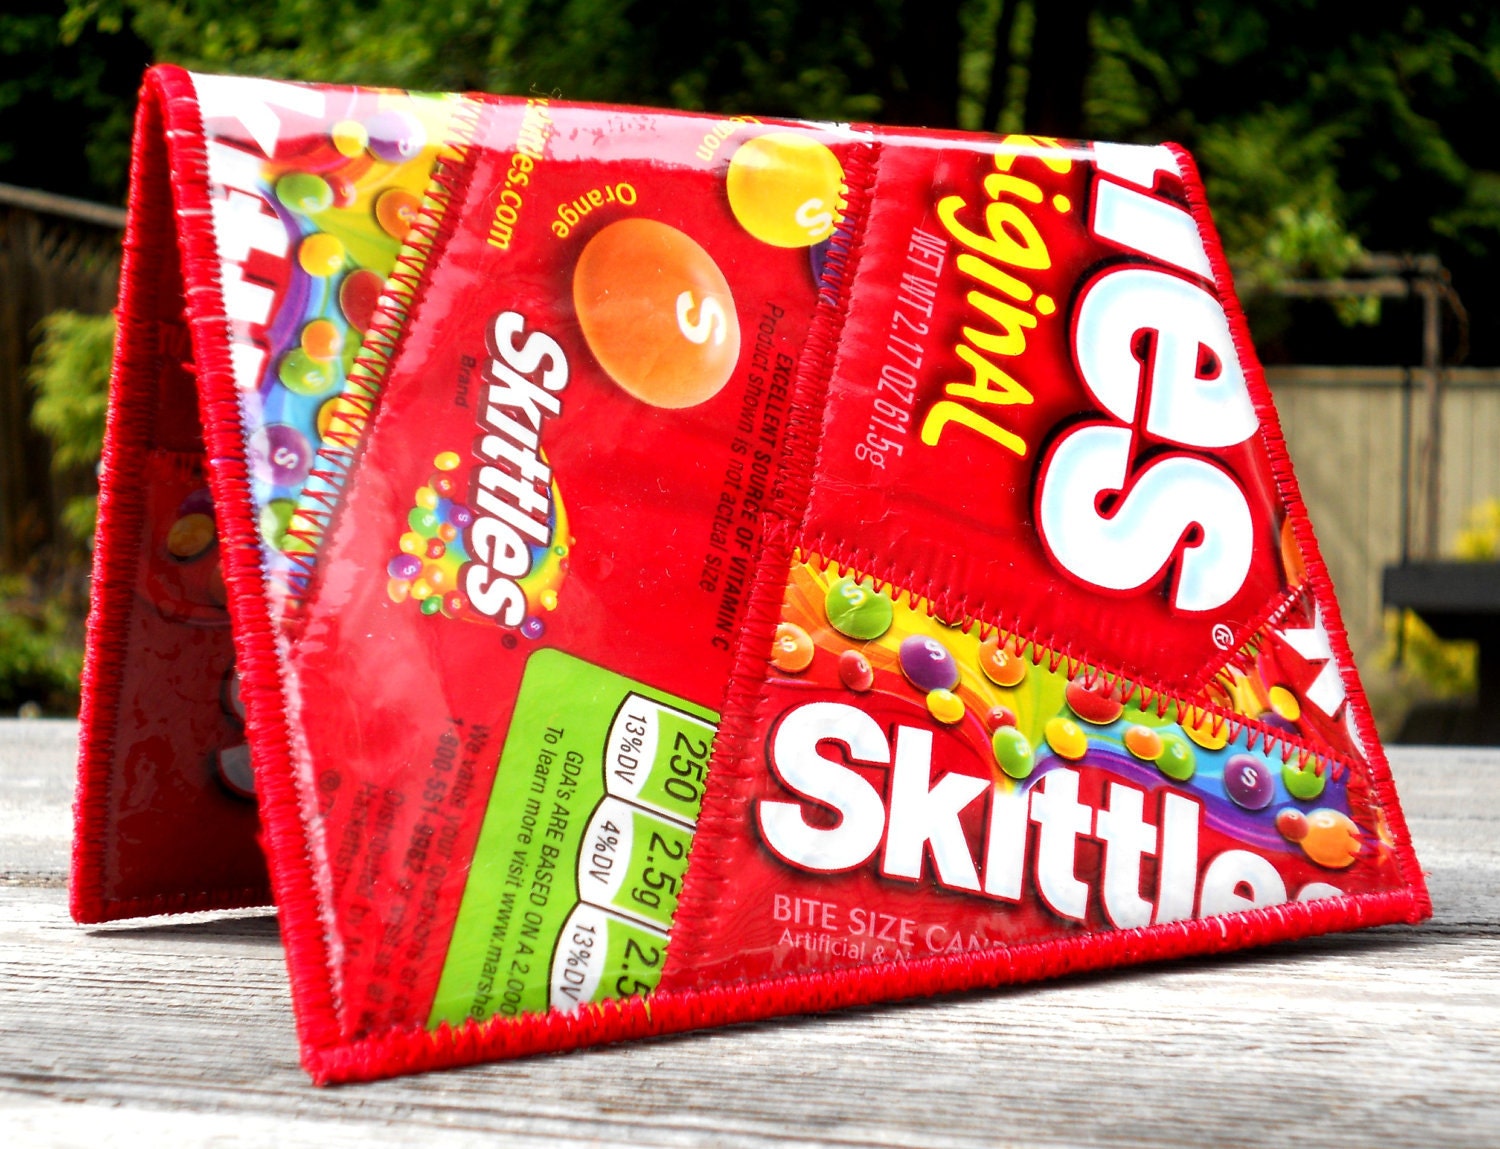 Download Wallet from Recycled Skittles Wrappers